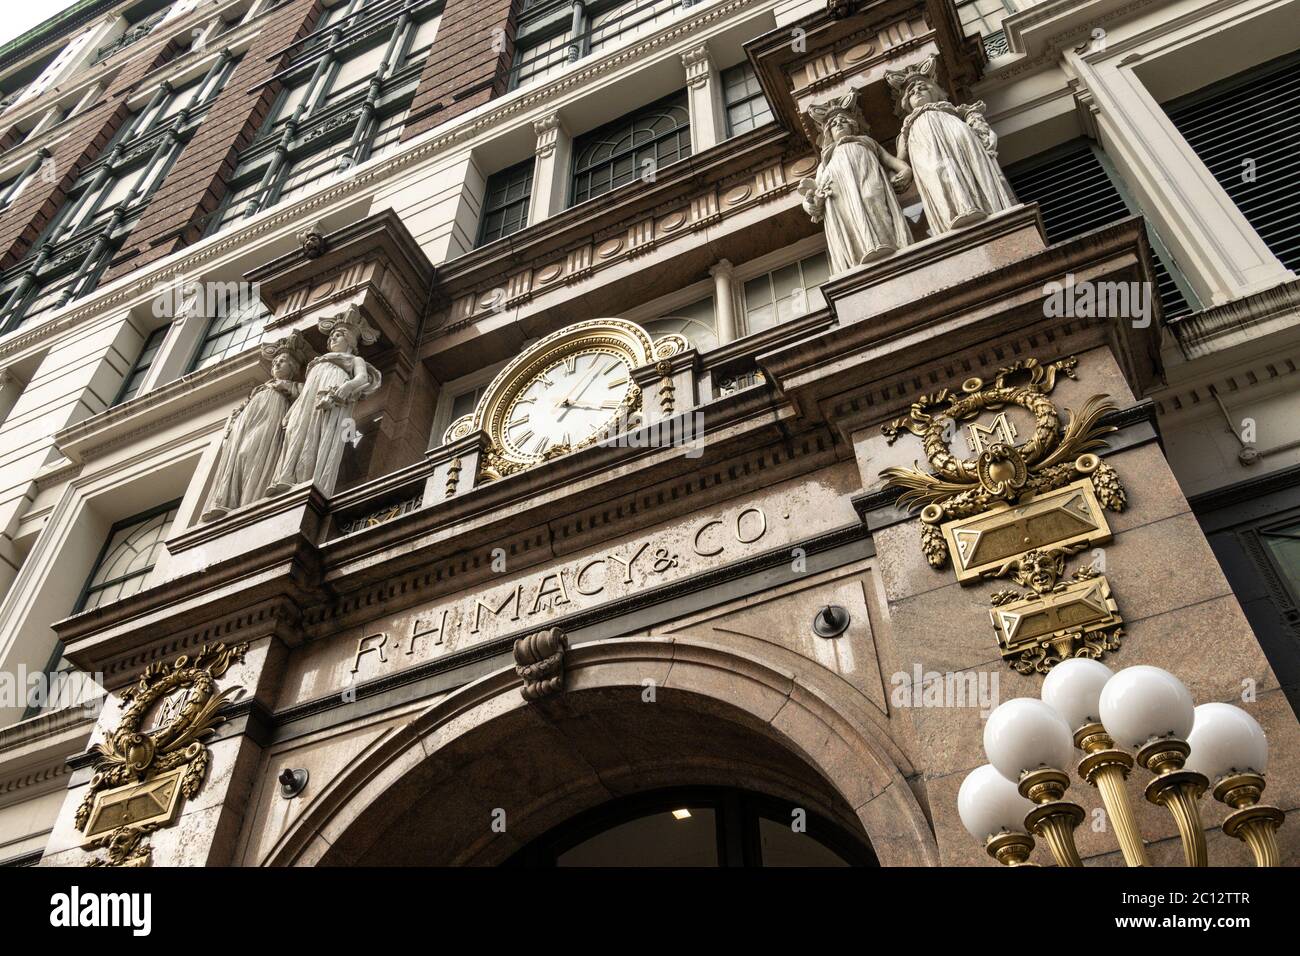 Beaux-Arts Statues, main Entrance, Macy's Flagship Department Store, 151 W. 34th Street, NYC Stock Photo